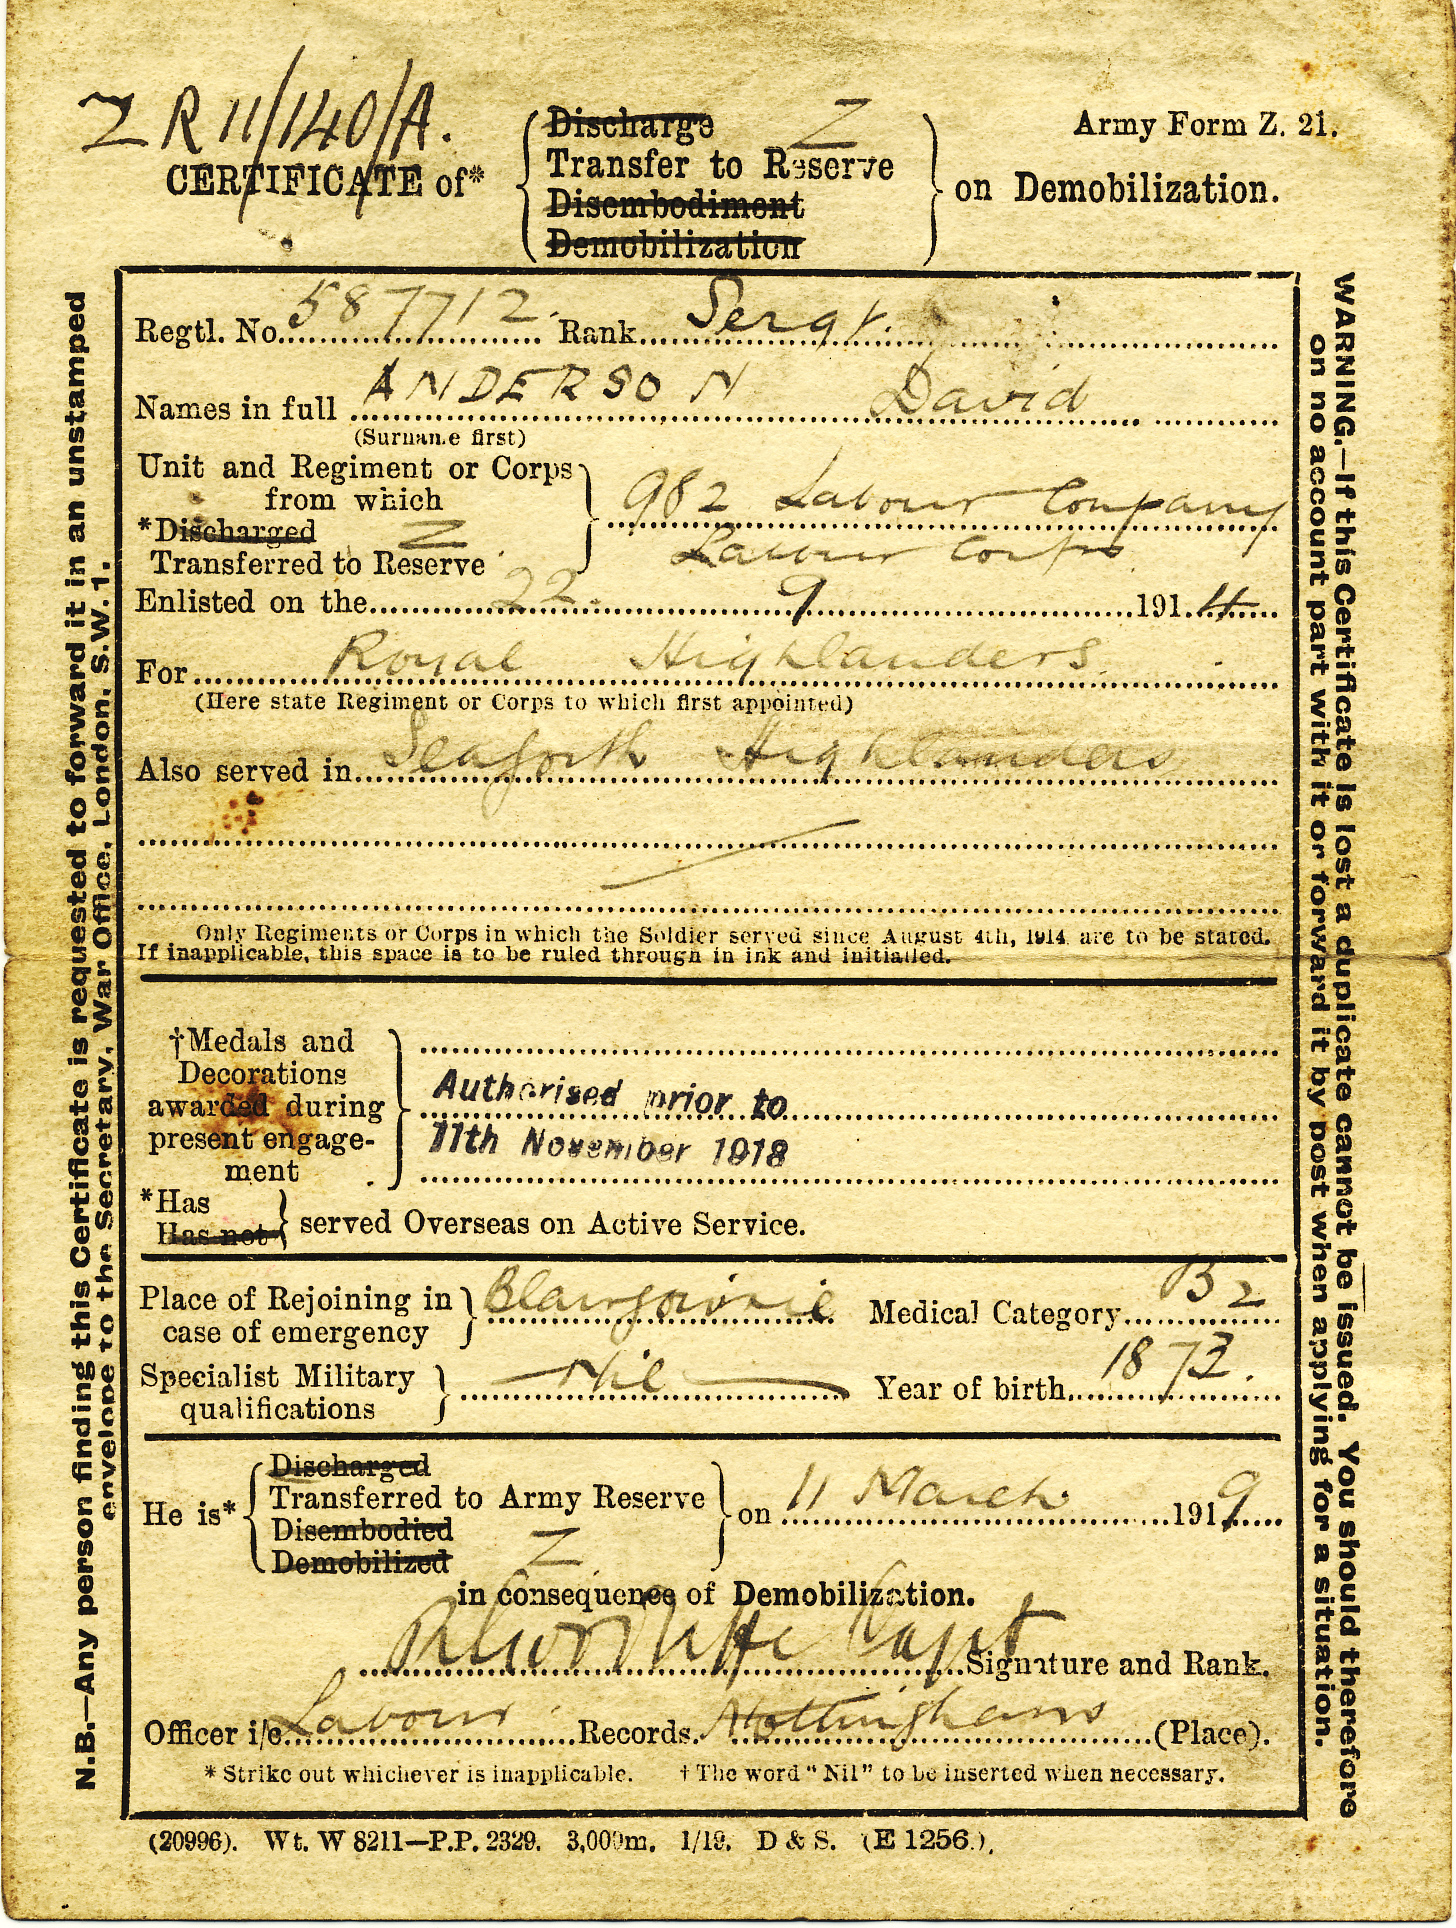 transfer to army reserve march 11 1919